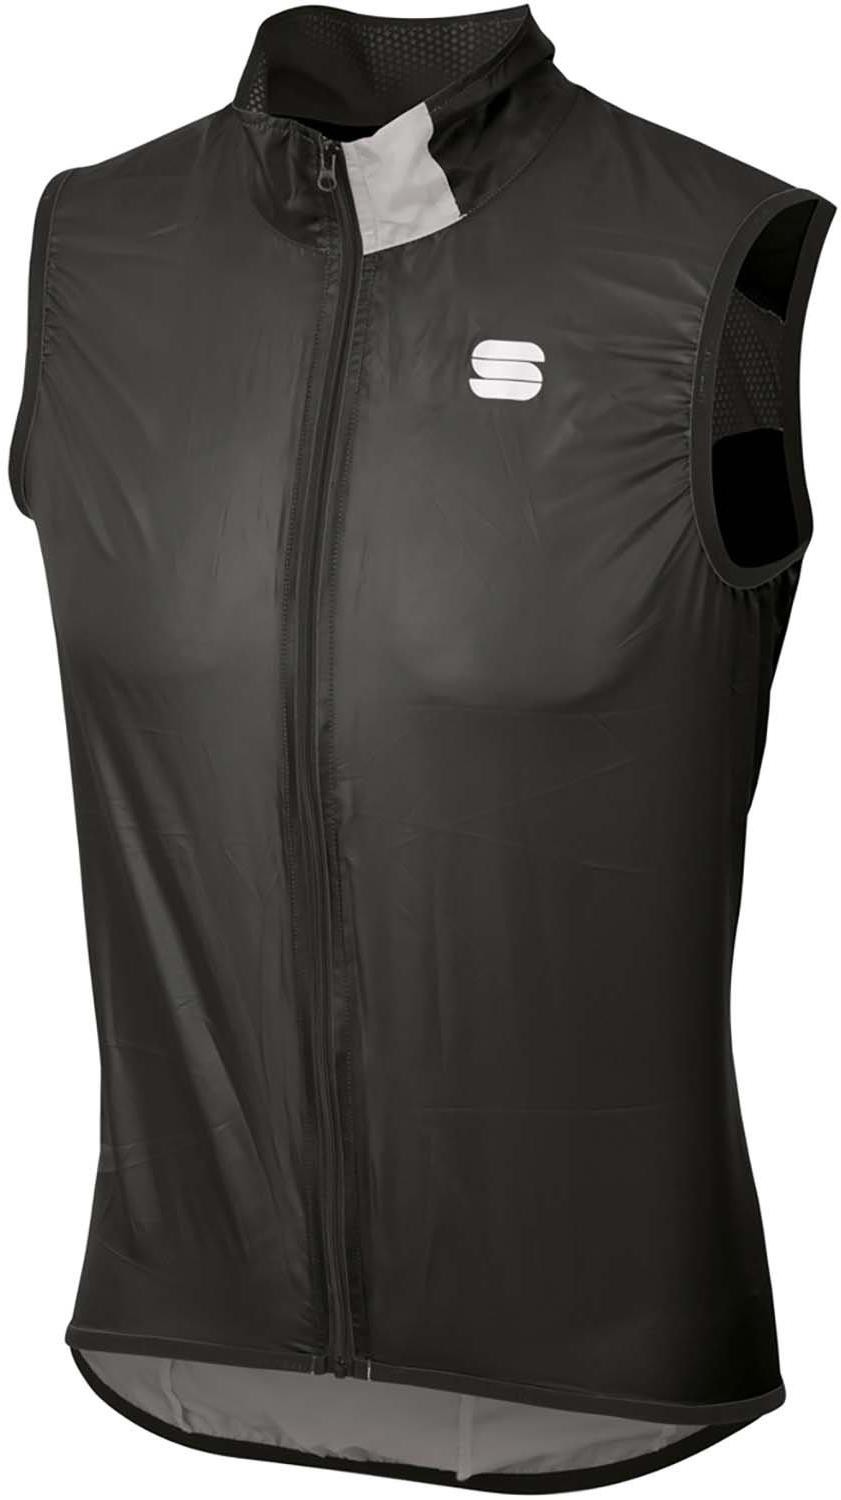 Hot Pack Easylight Cycling Vest image 0